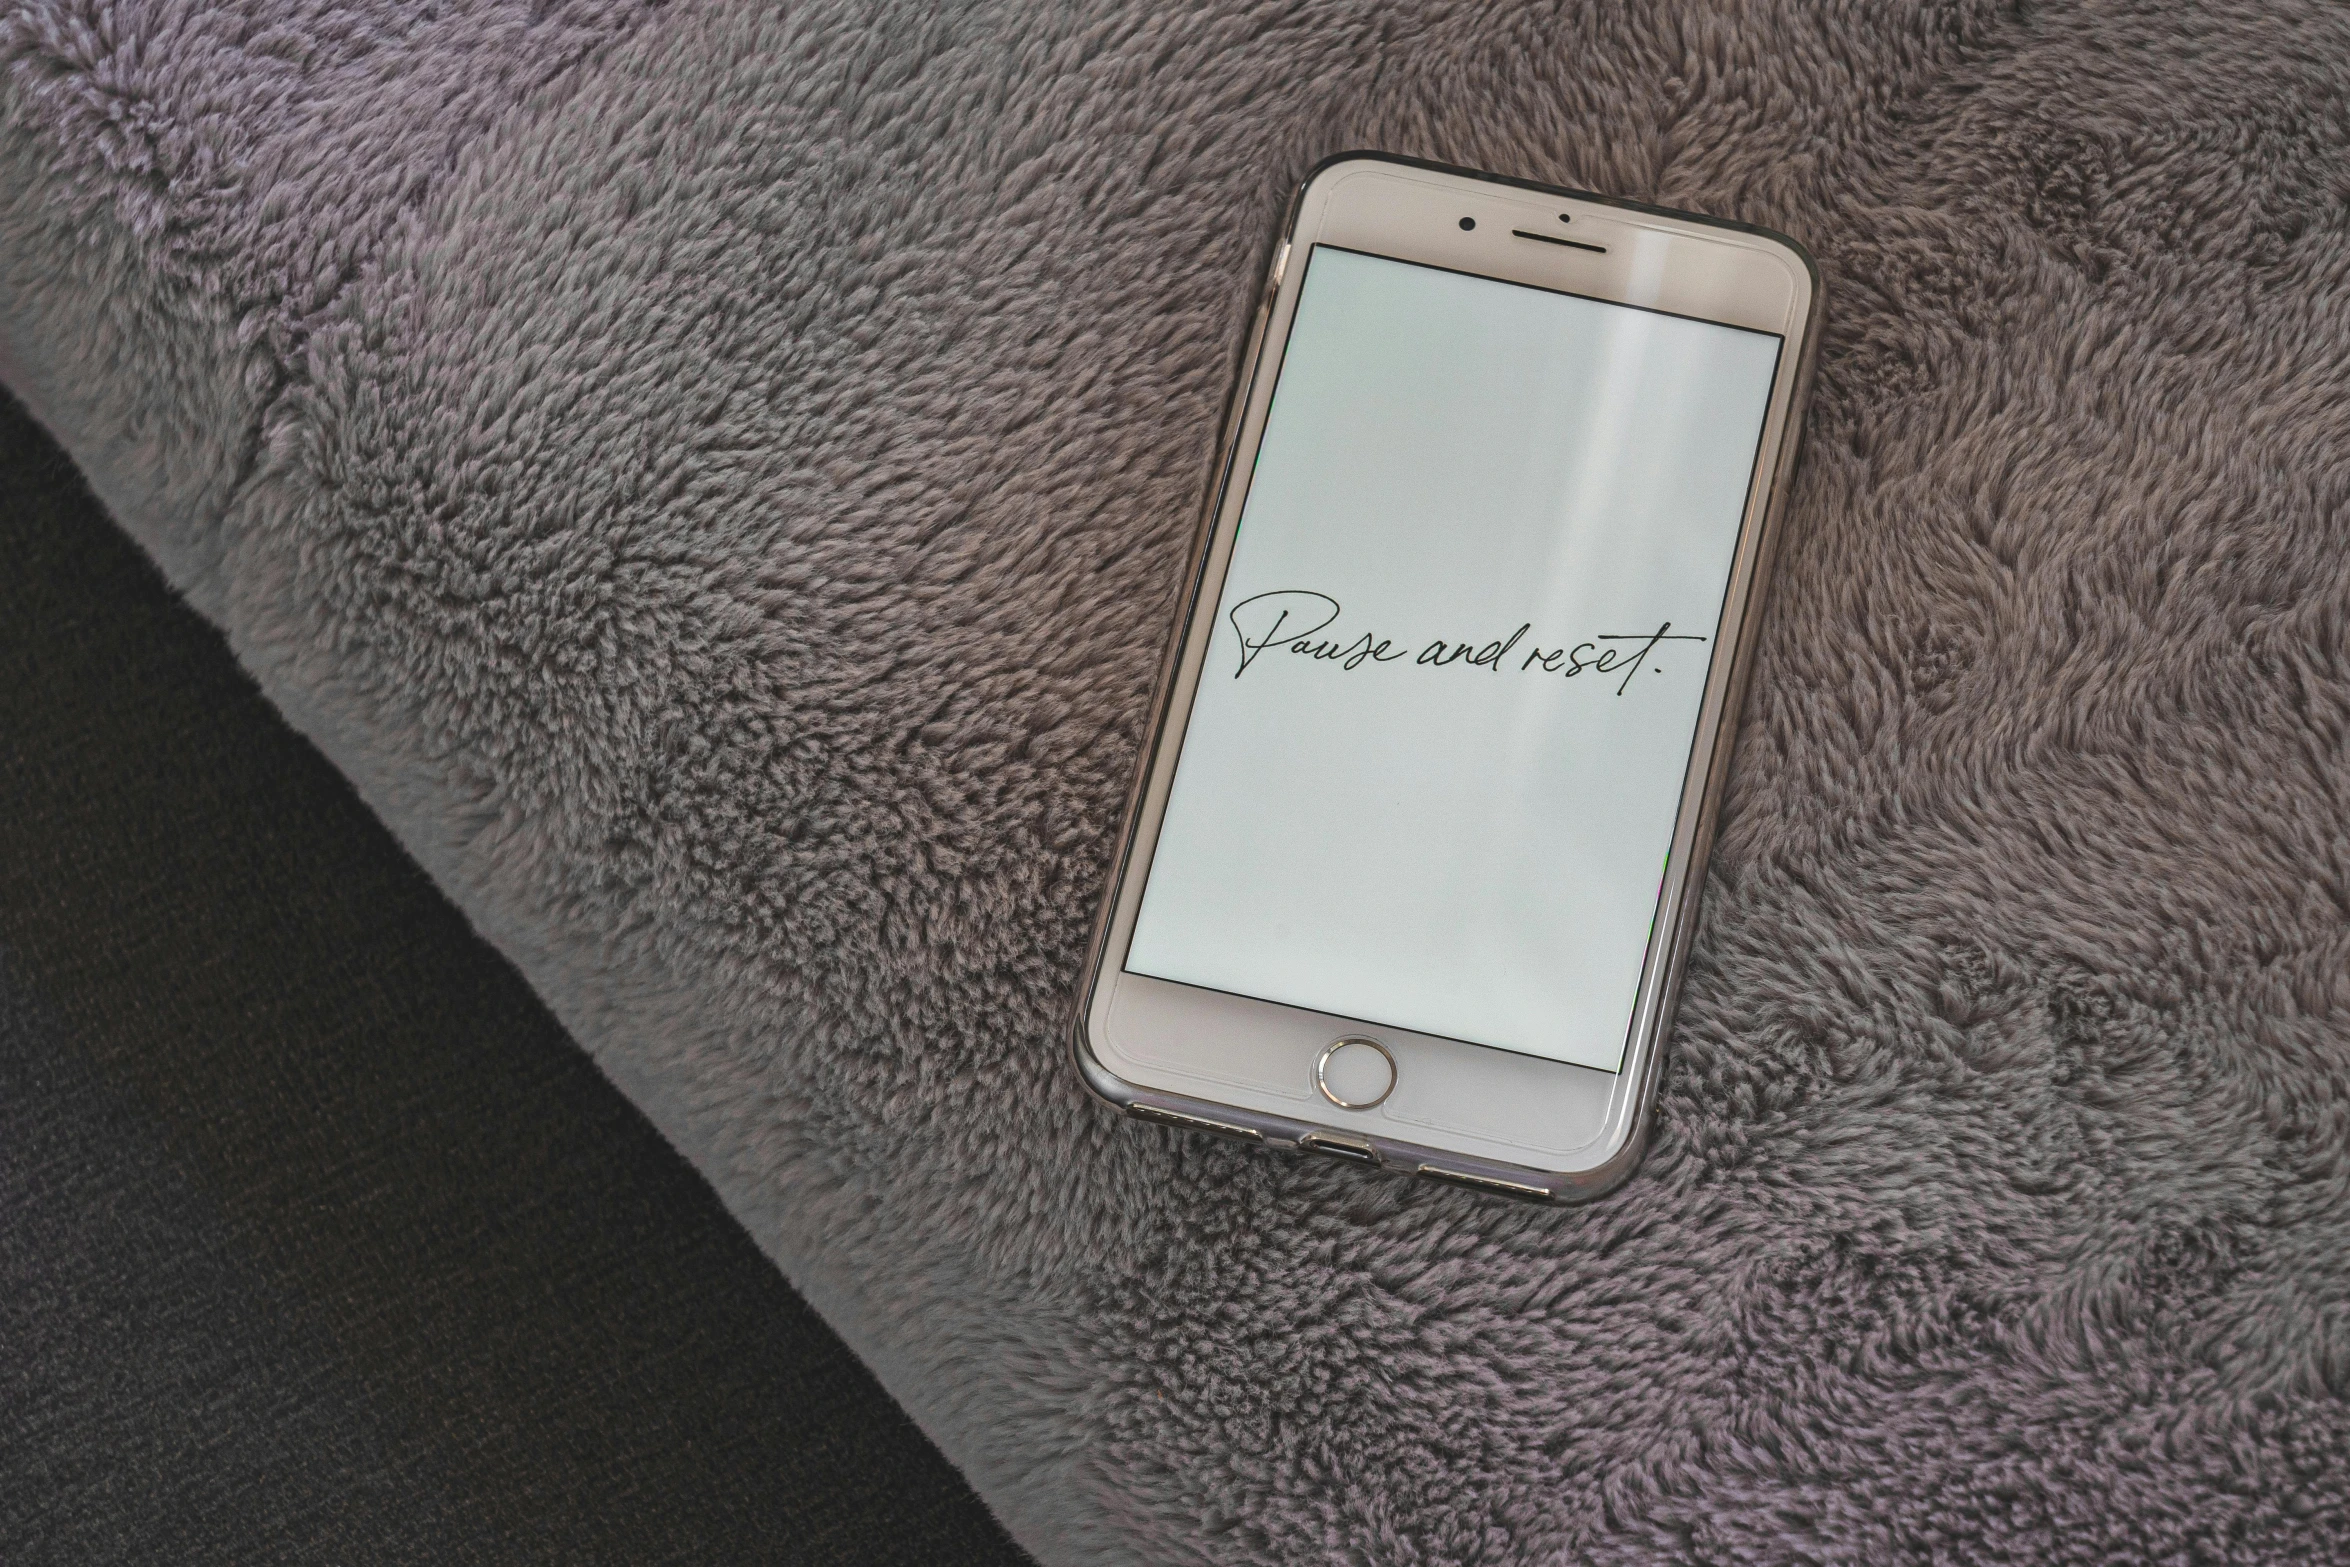 a close up of a cell phone on a blanket, an album cover, pexels, “modern calligraphy art, velvet couch, white and grey, beautiful iphone wallpaper